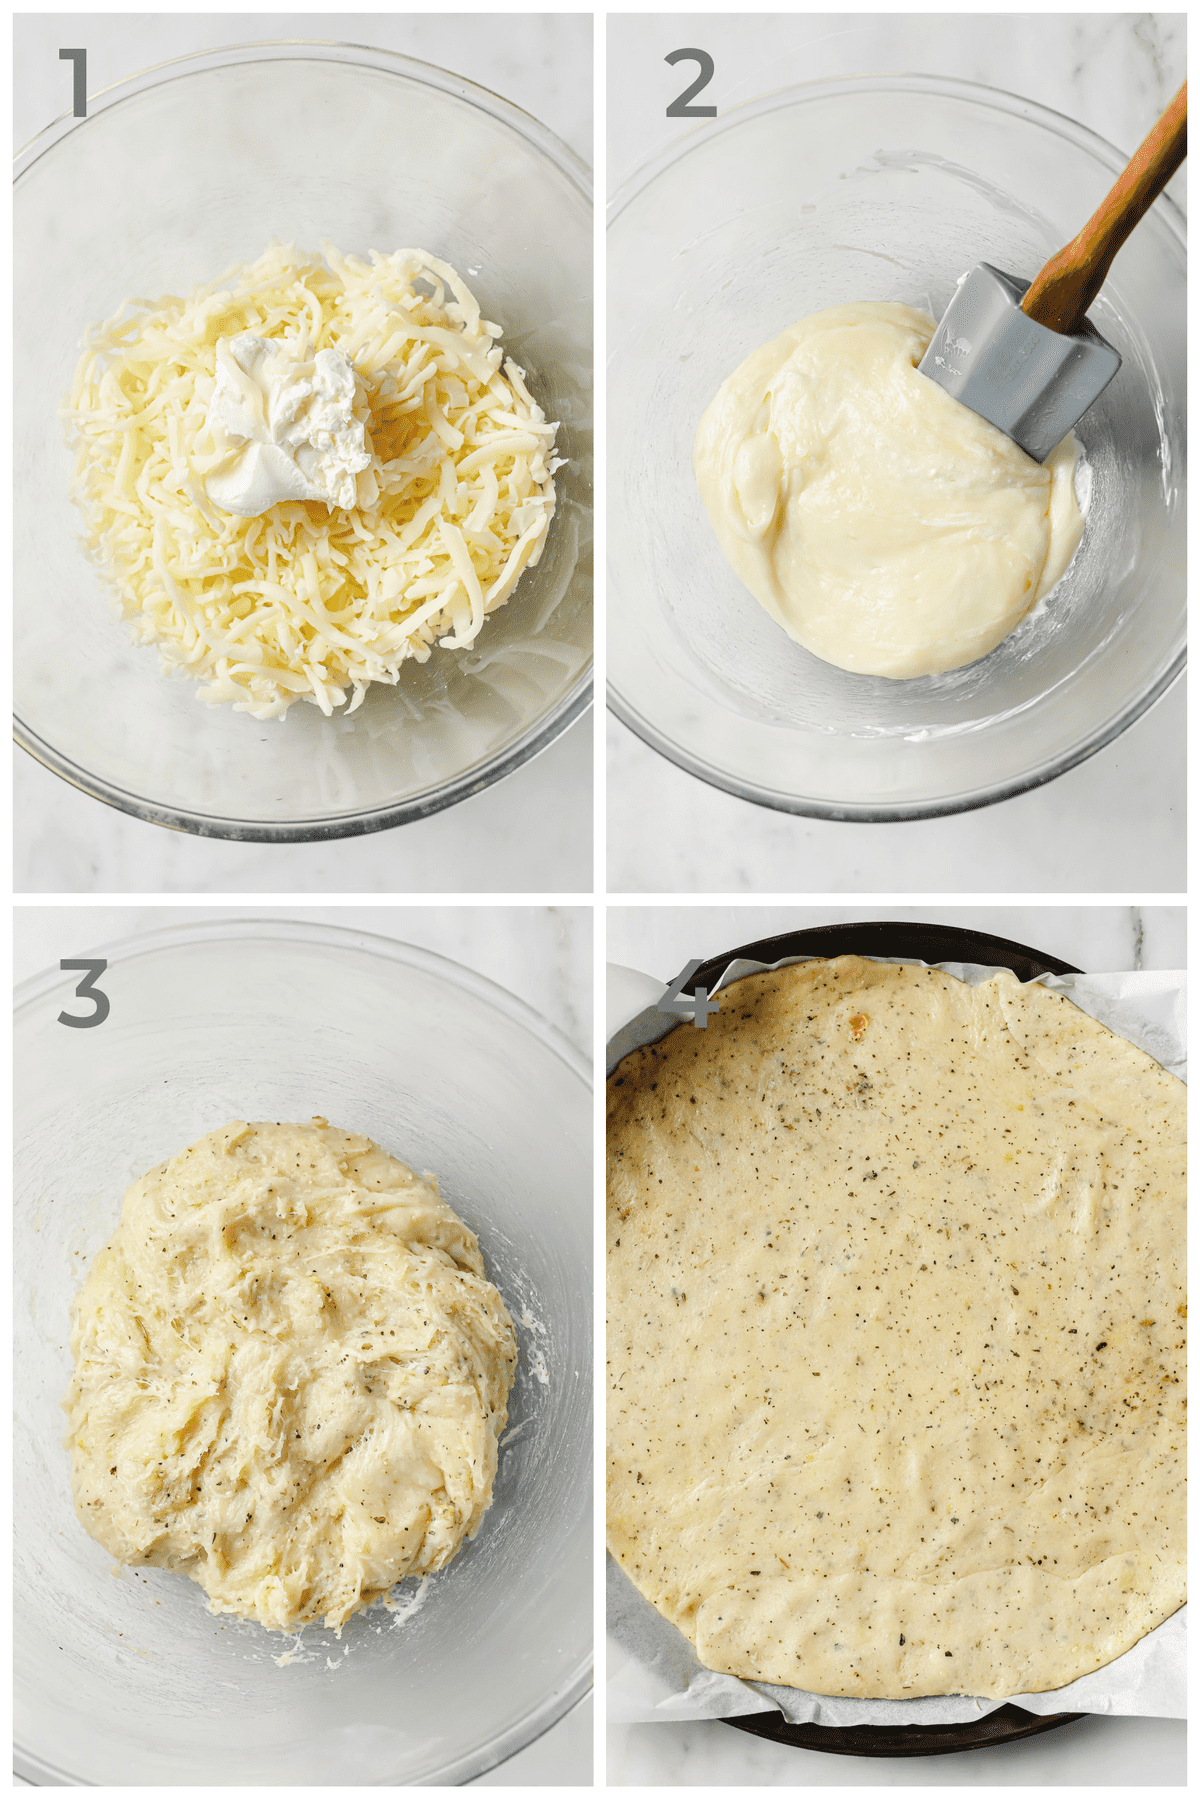 step by step photo instructions for how to make keto pizza dough.